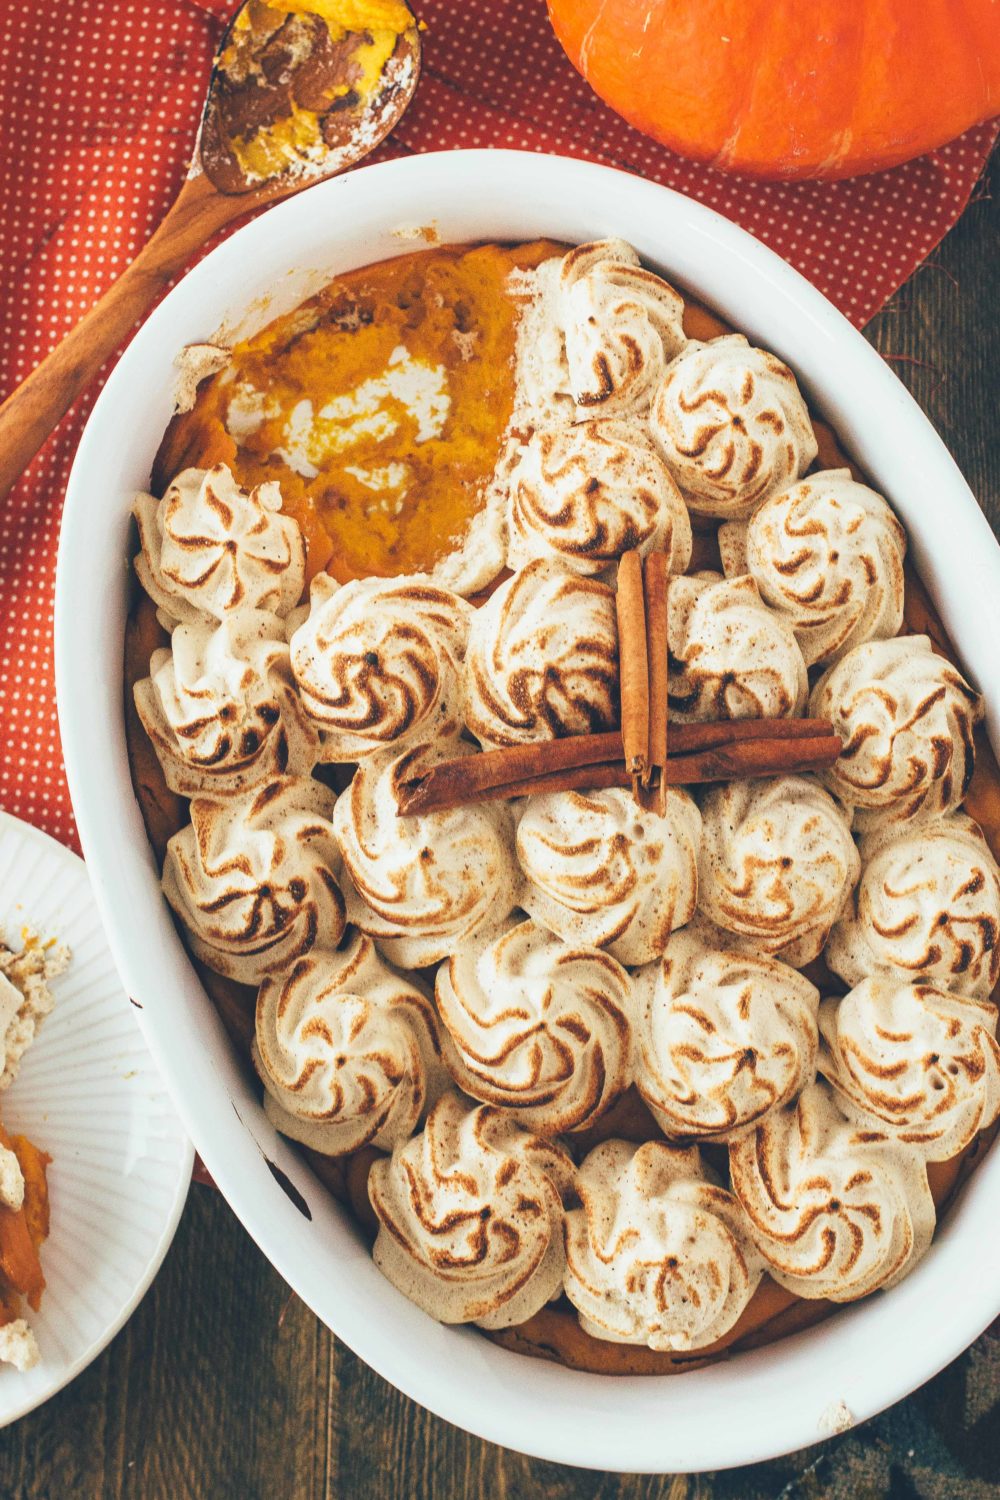 Sweet Potato Casserole with Meringue Topping